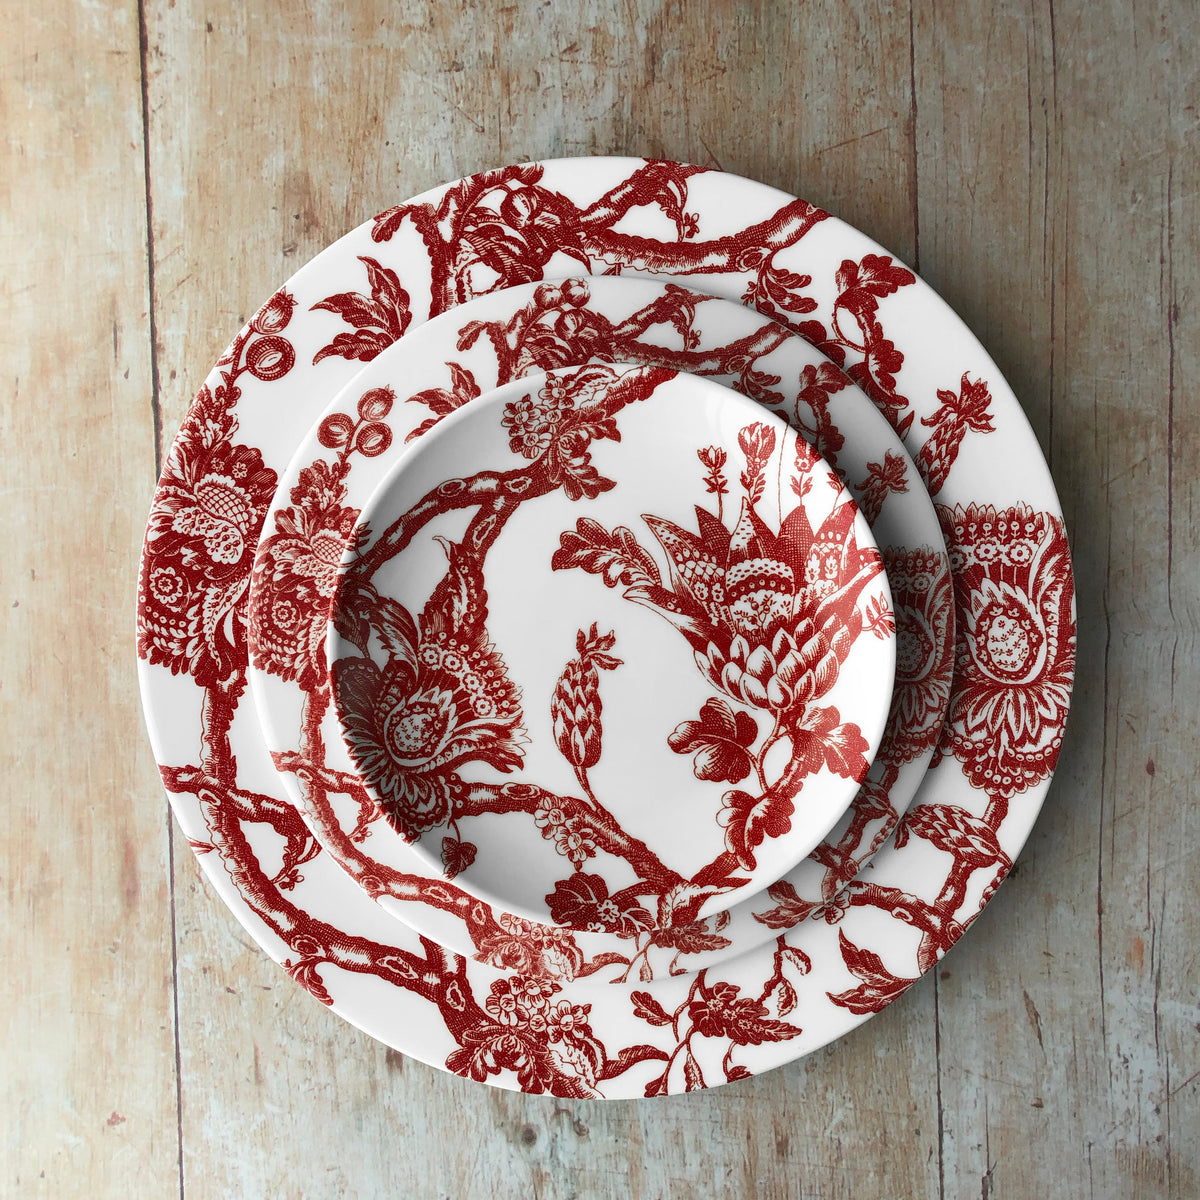 A set of Arcadia Salad Plate Crimson plates from the Caskata Artisanal Home porcelain collection on a wooden table.